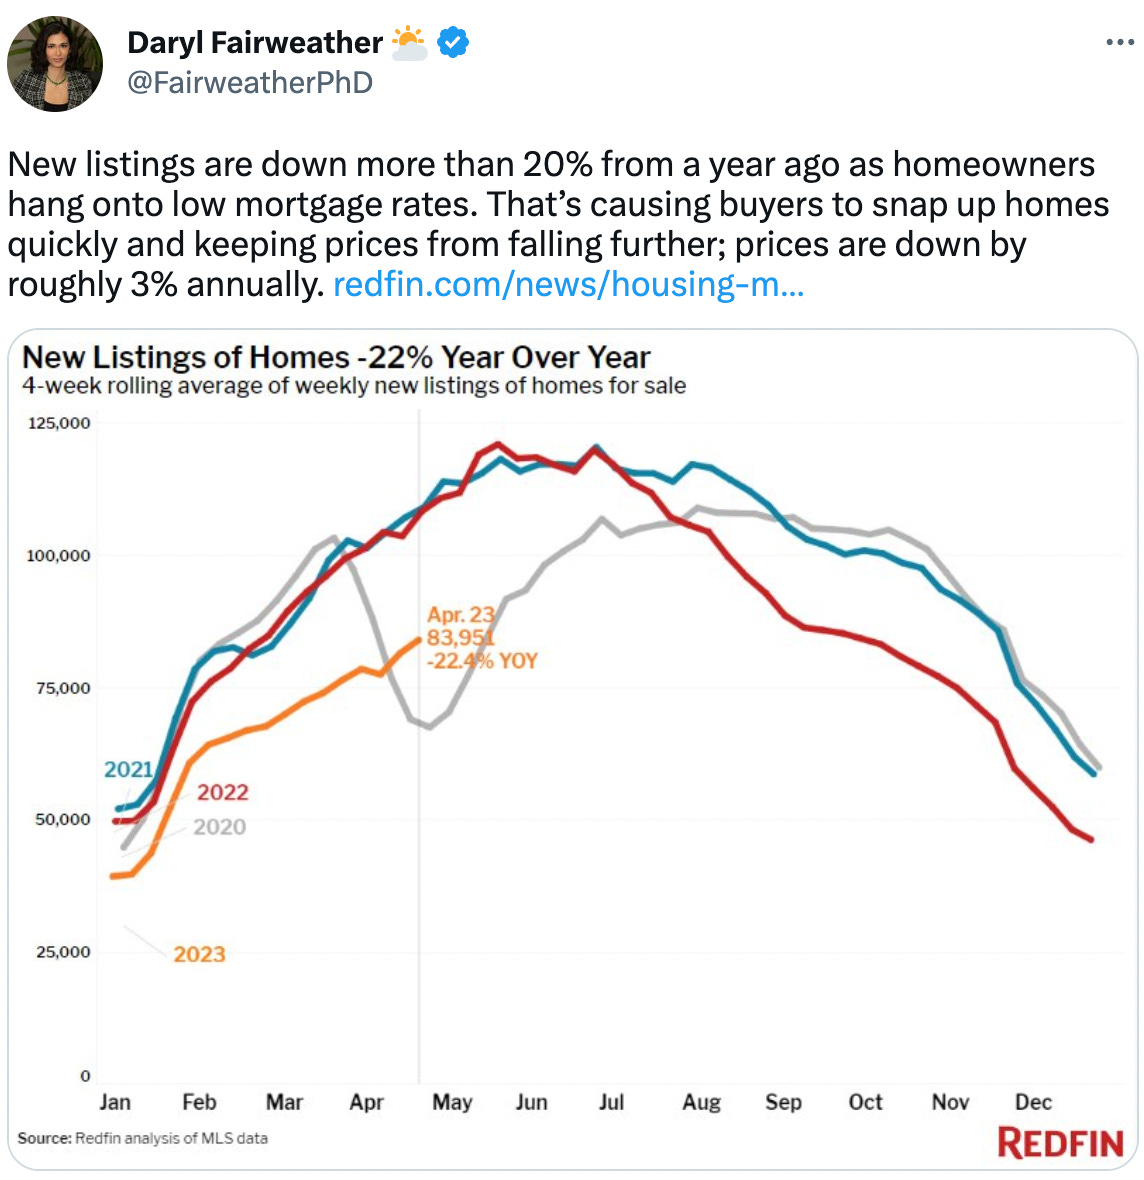  Daryl Fairweather ⛅ @FairweatherPhD New listings are down more than 20% from a year ago as homeowners hang onto low mortgage rates. That’s causing buyers to snap up homes quickly and keeping prices from falling further; prices are down by roughly 3% annually. https://redfin.com/news/housing-market-update-new-listings-decline/